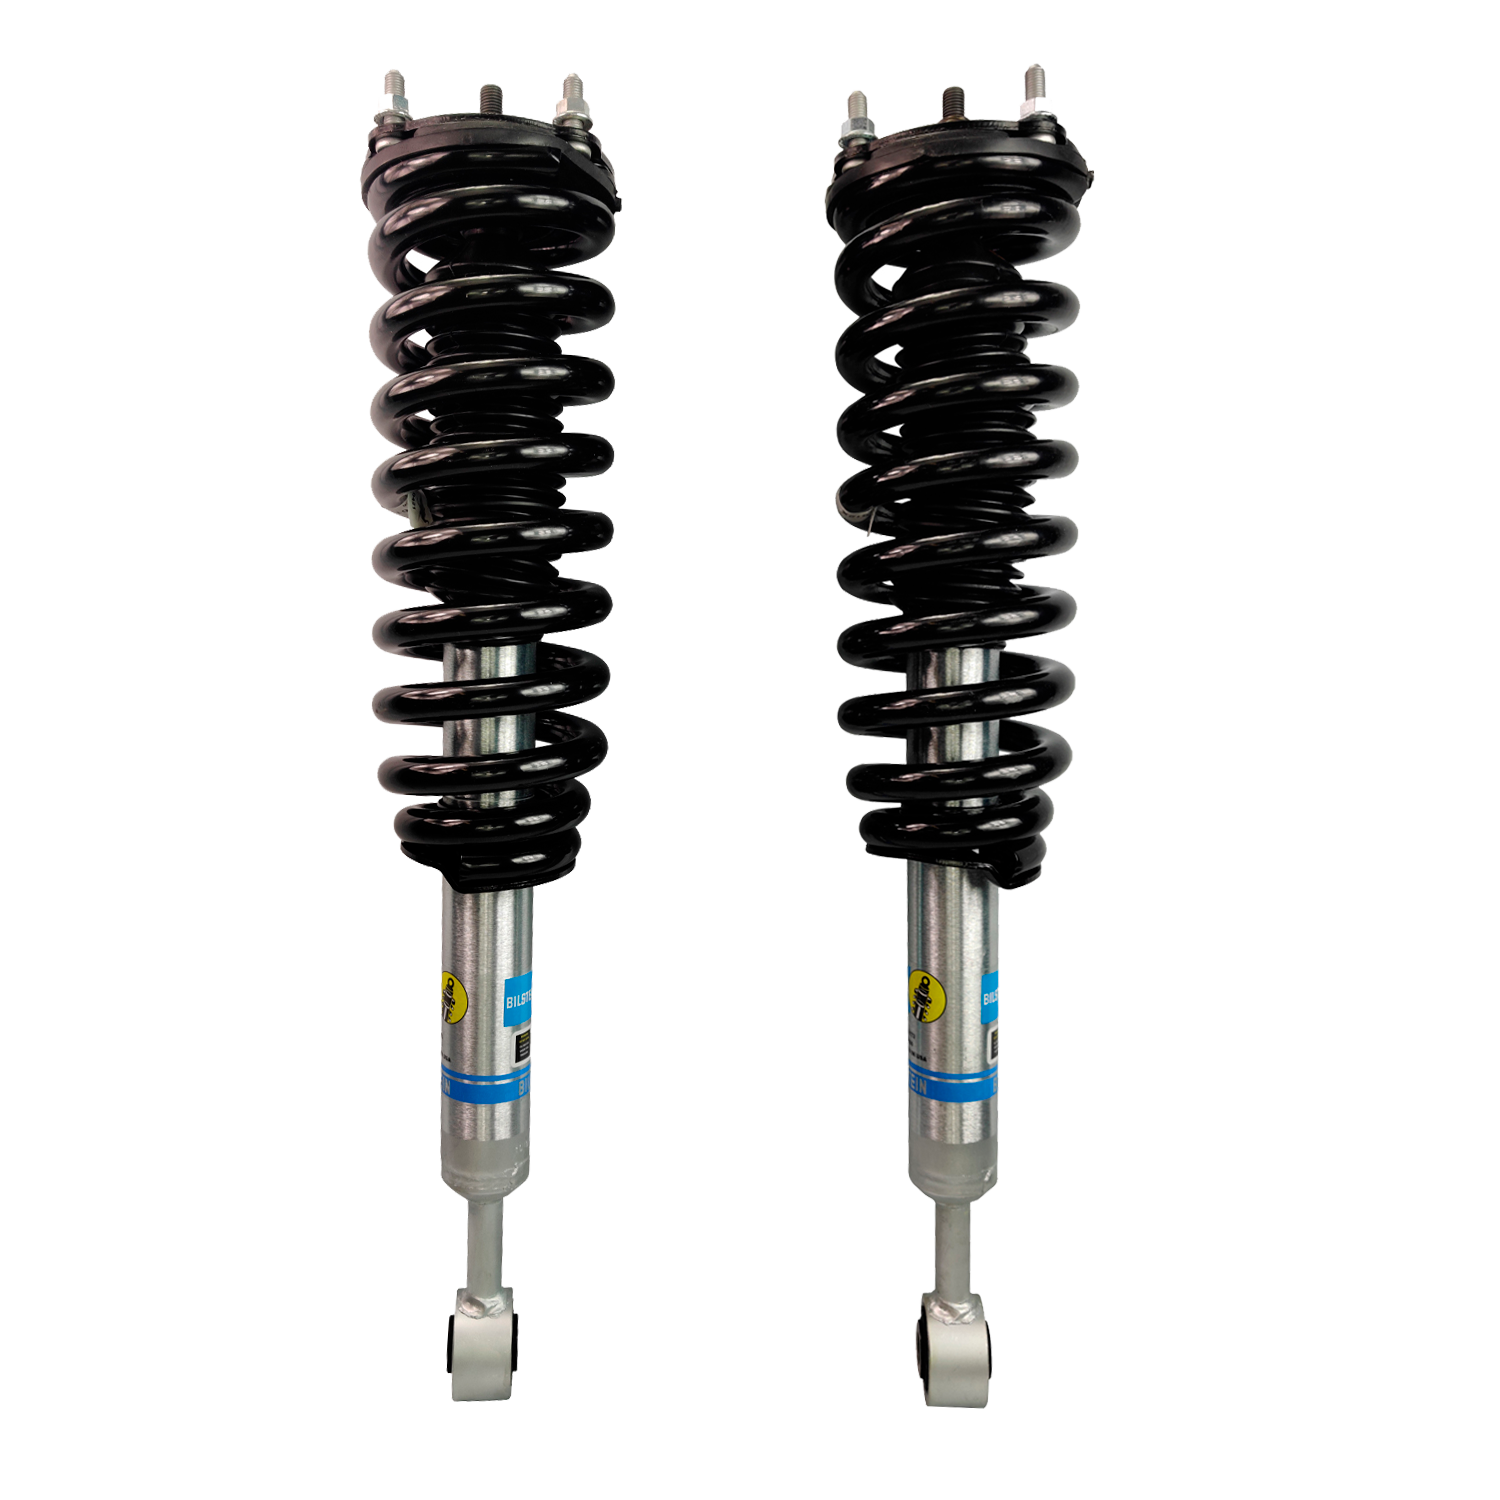 BILSTEIN 5100 3″ FRONT LIFT ASSEMBLED STRUTS FOR 2007-2021 TOYOTA TUNDRA 24-232173assembled (4WD ONLY)